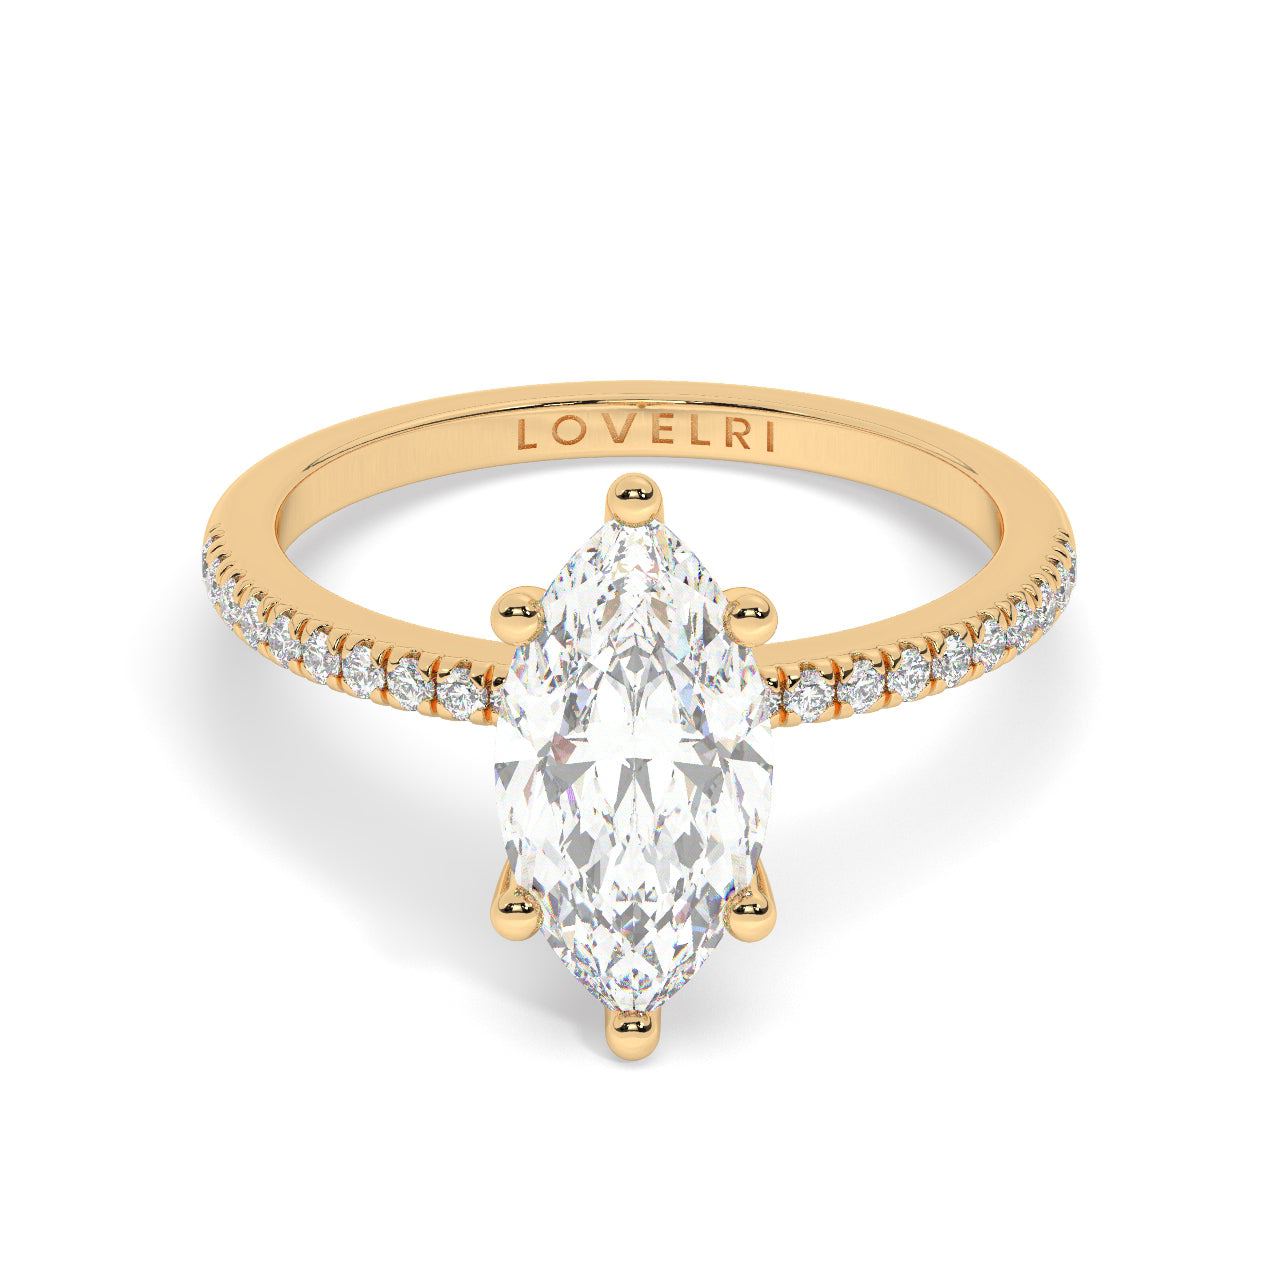 Marquise Cut Diamond Ring set on a Pavé Band in Yellow Gold